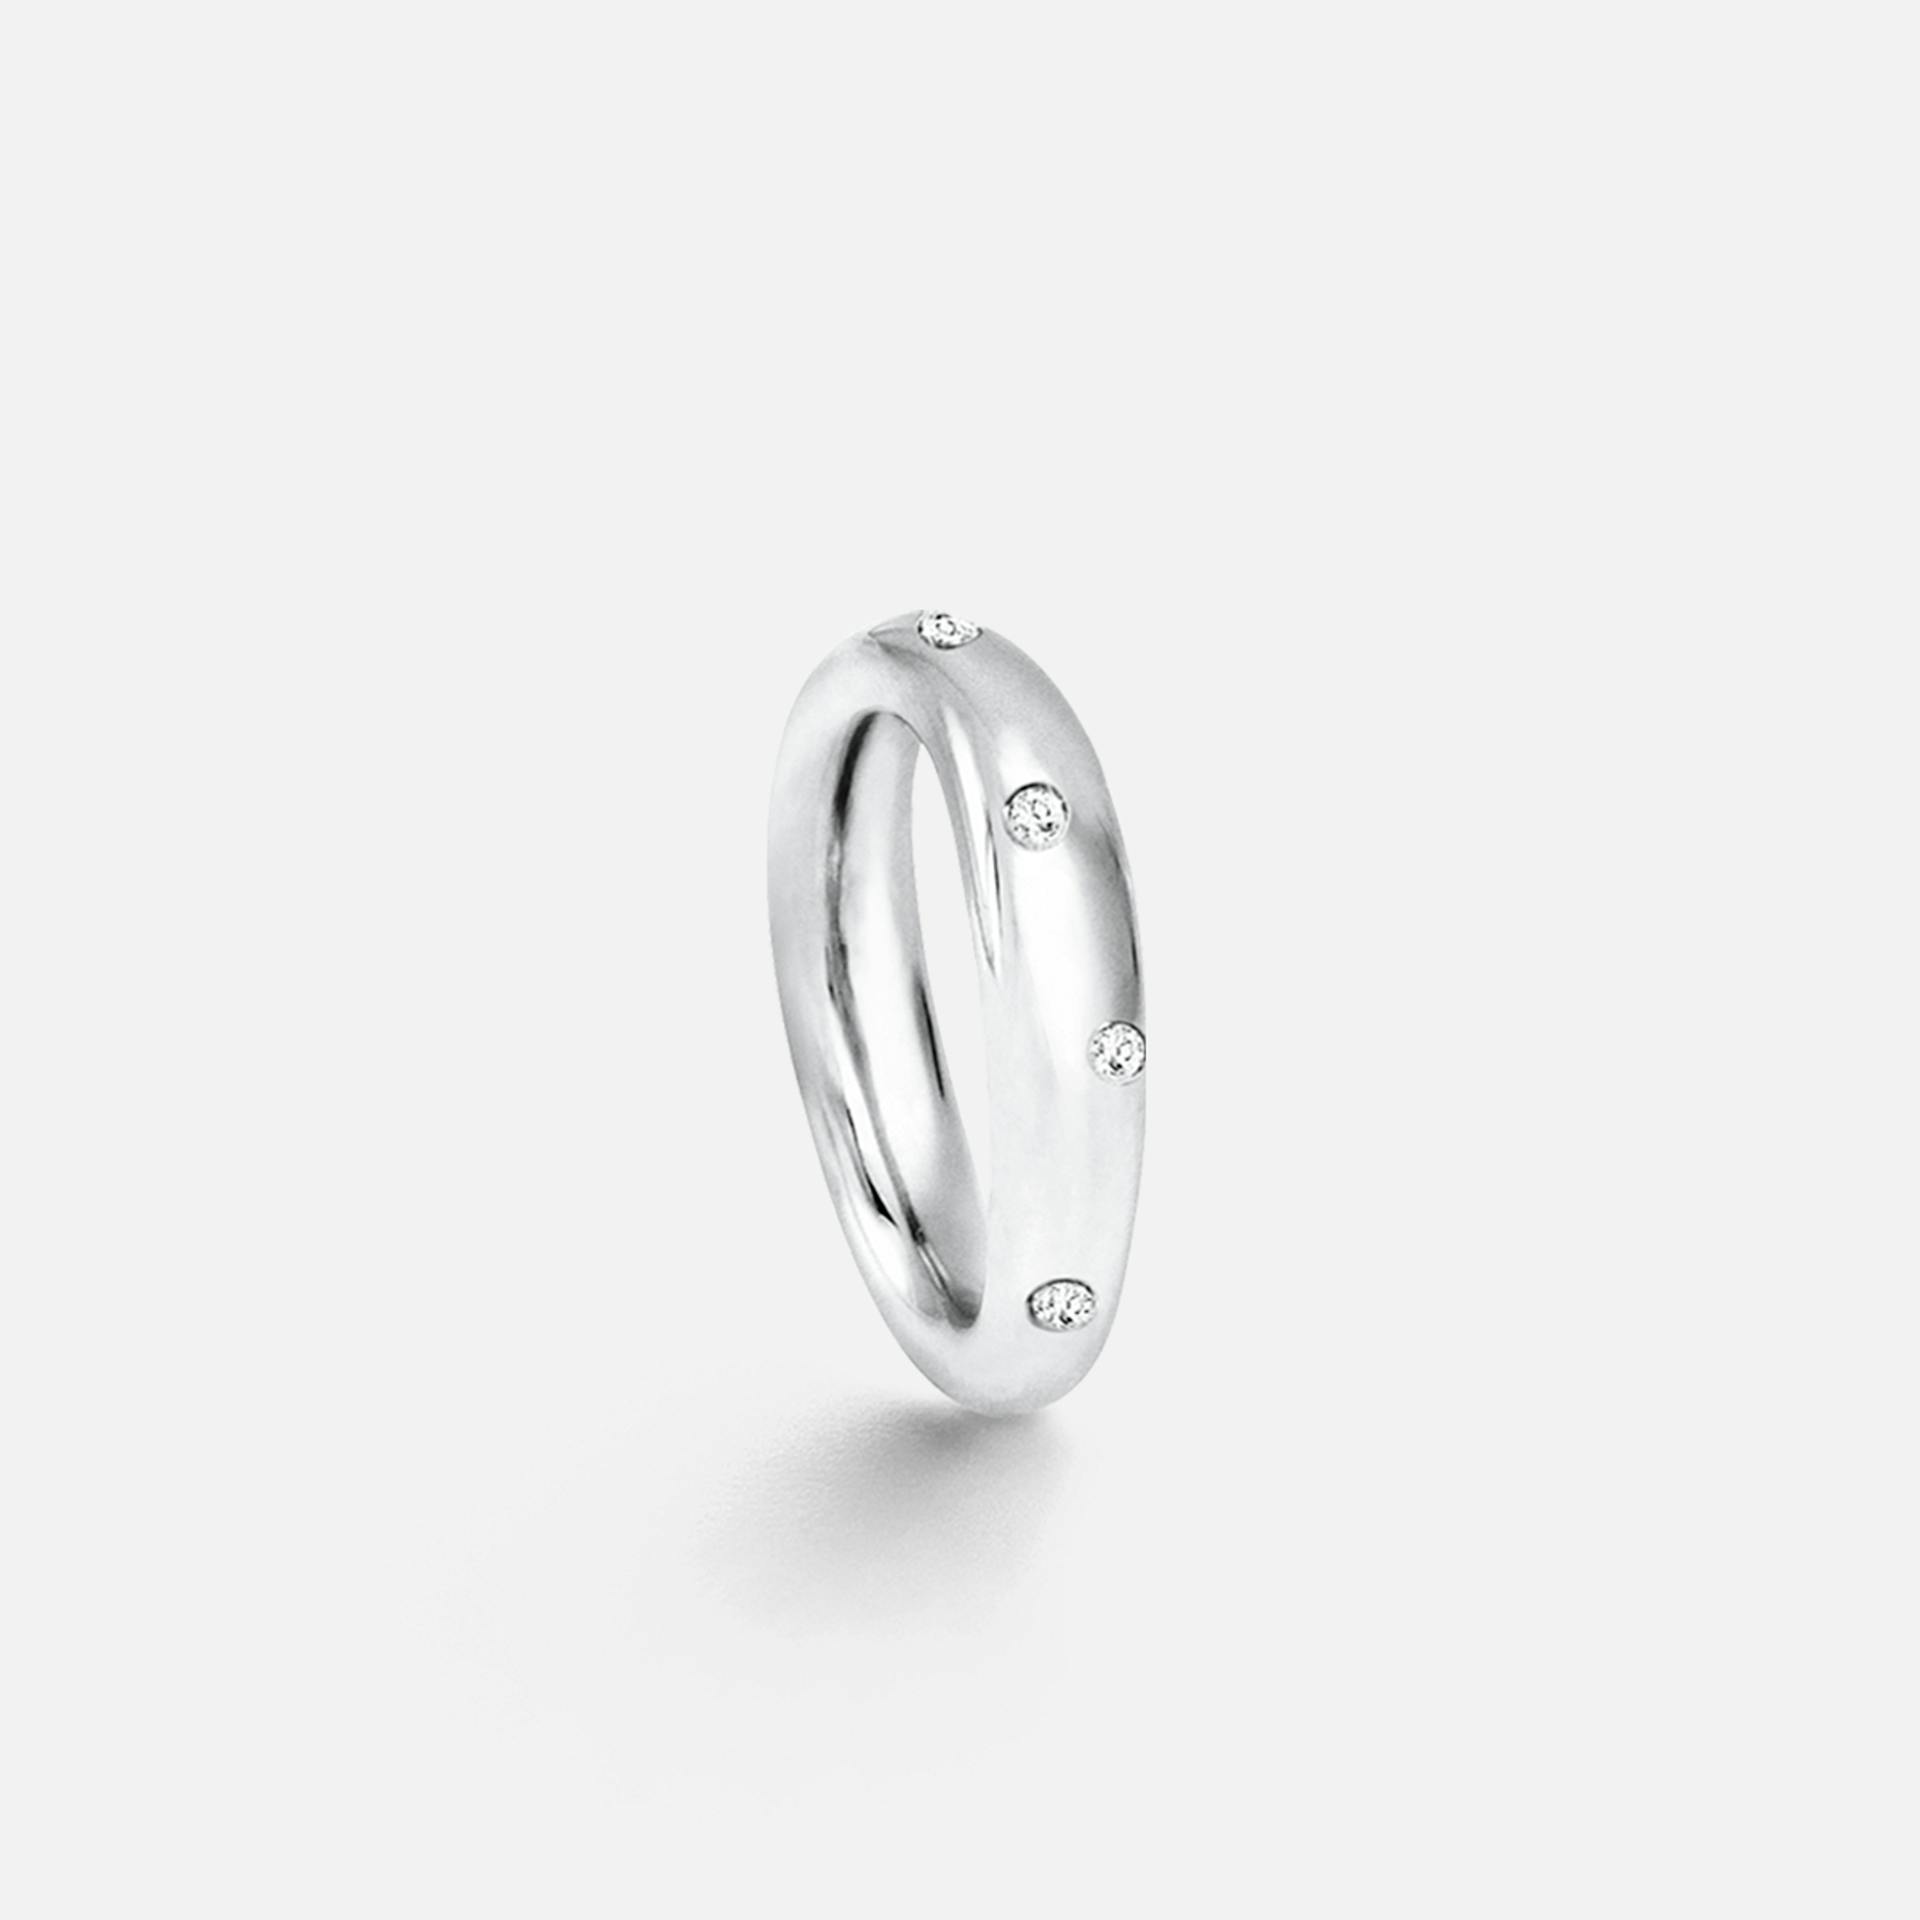 Love ring 4 18k white gold polished and diamonds 0.18 ct. TW. VS.